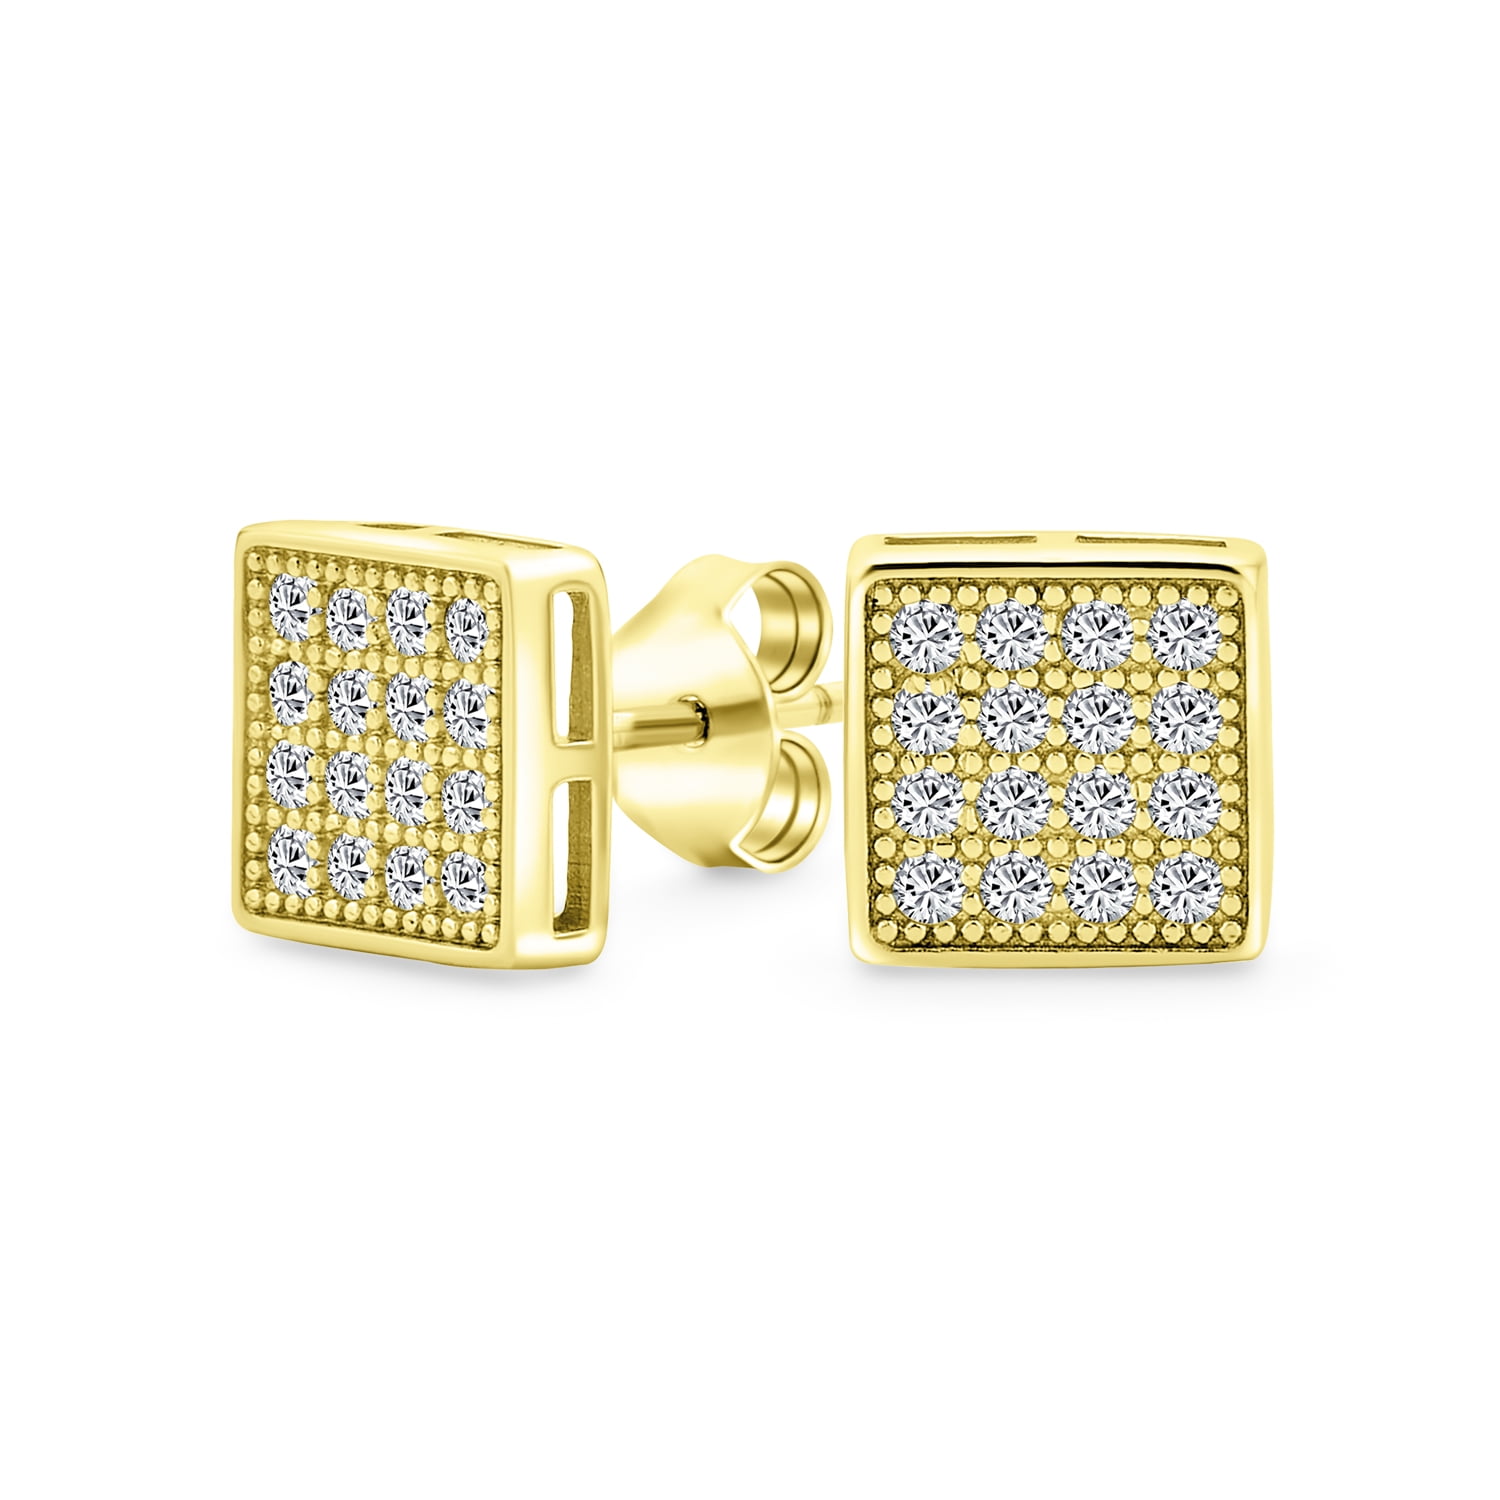 Gold Small 7mm Square Cluster CZ Stud Earrings Unisex 